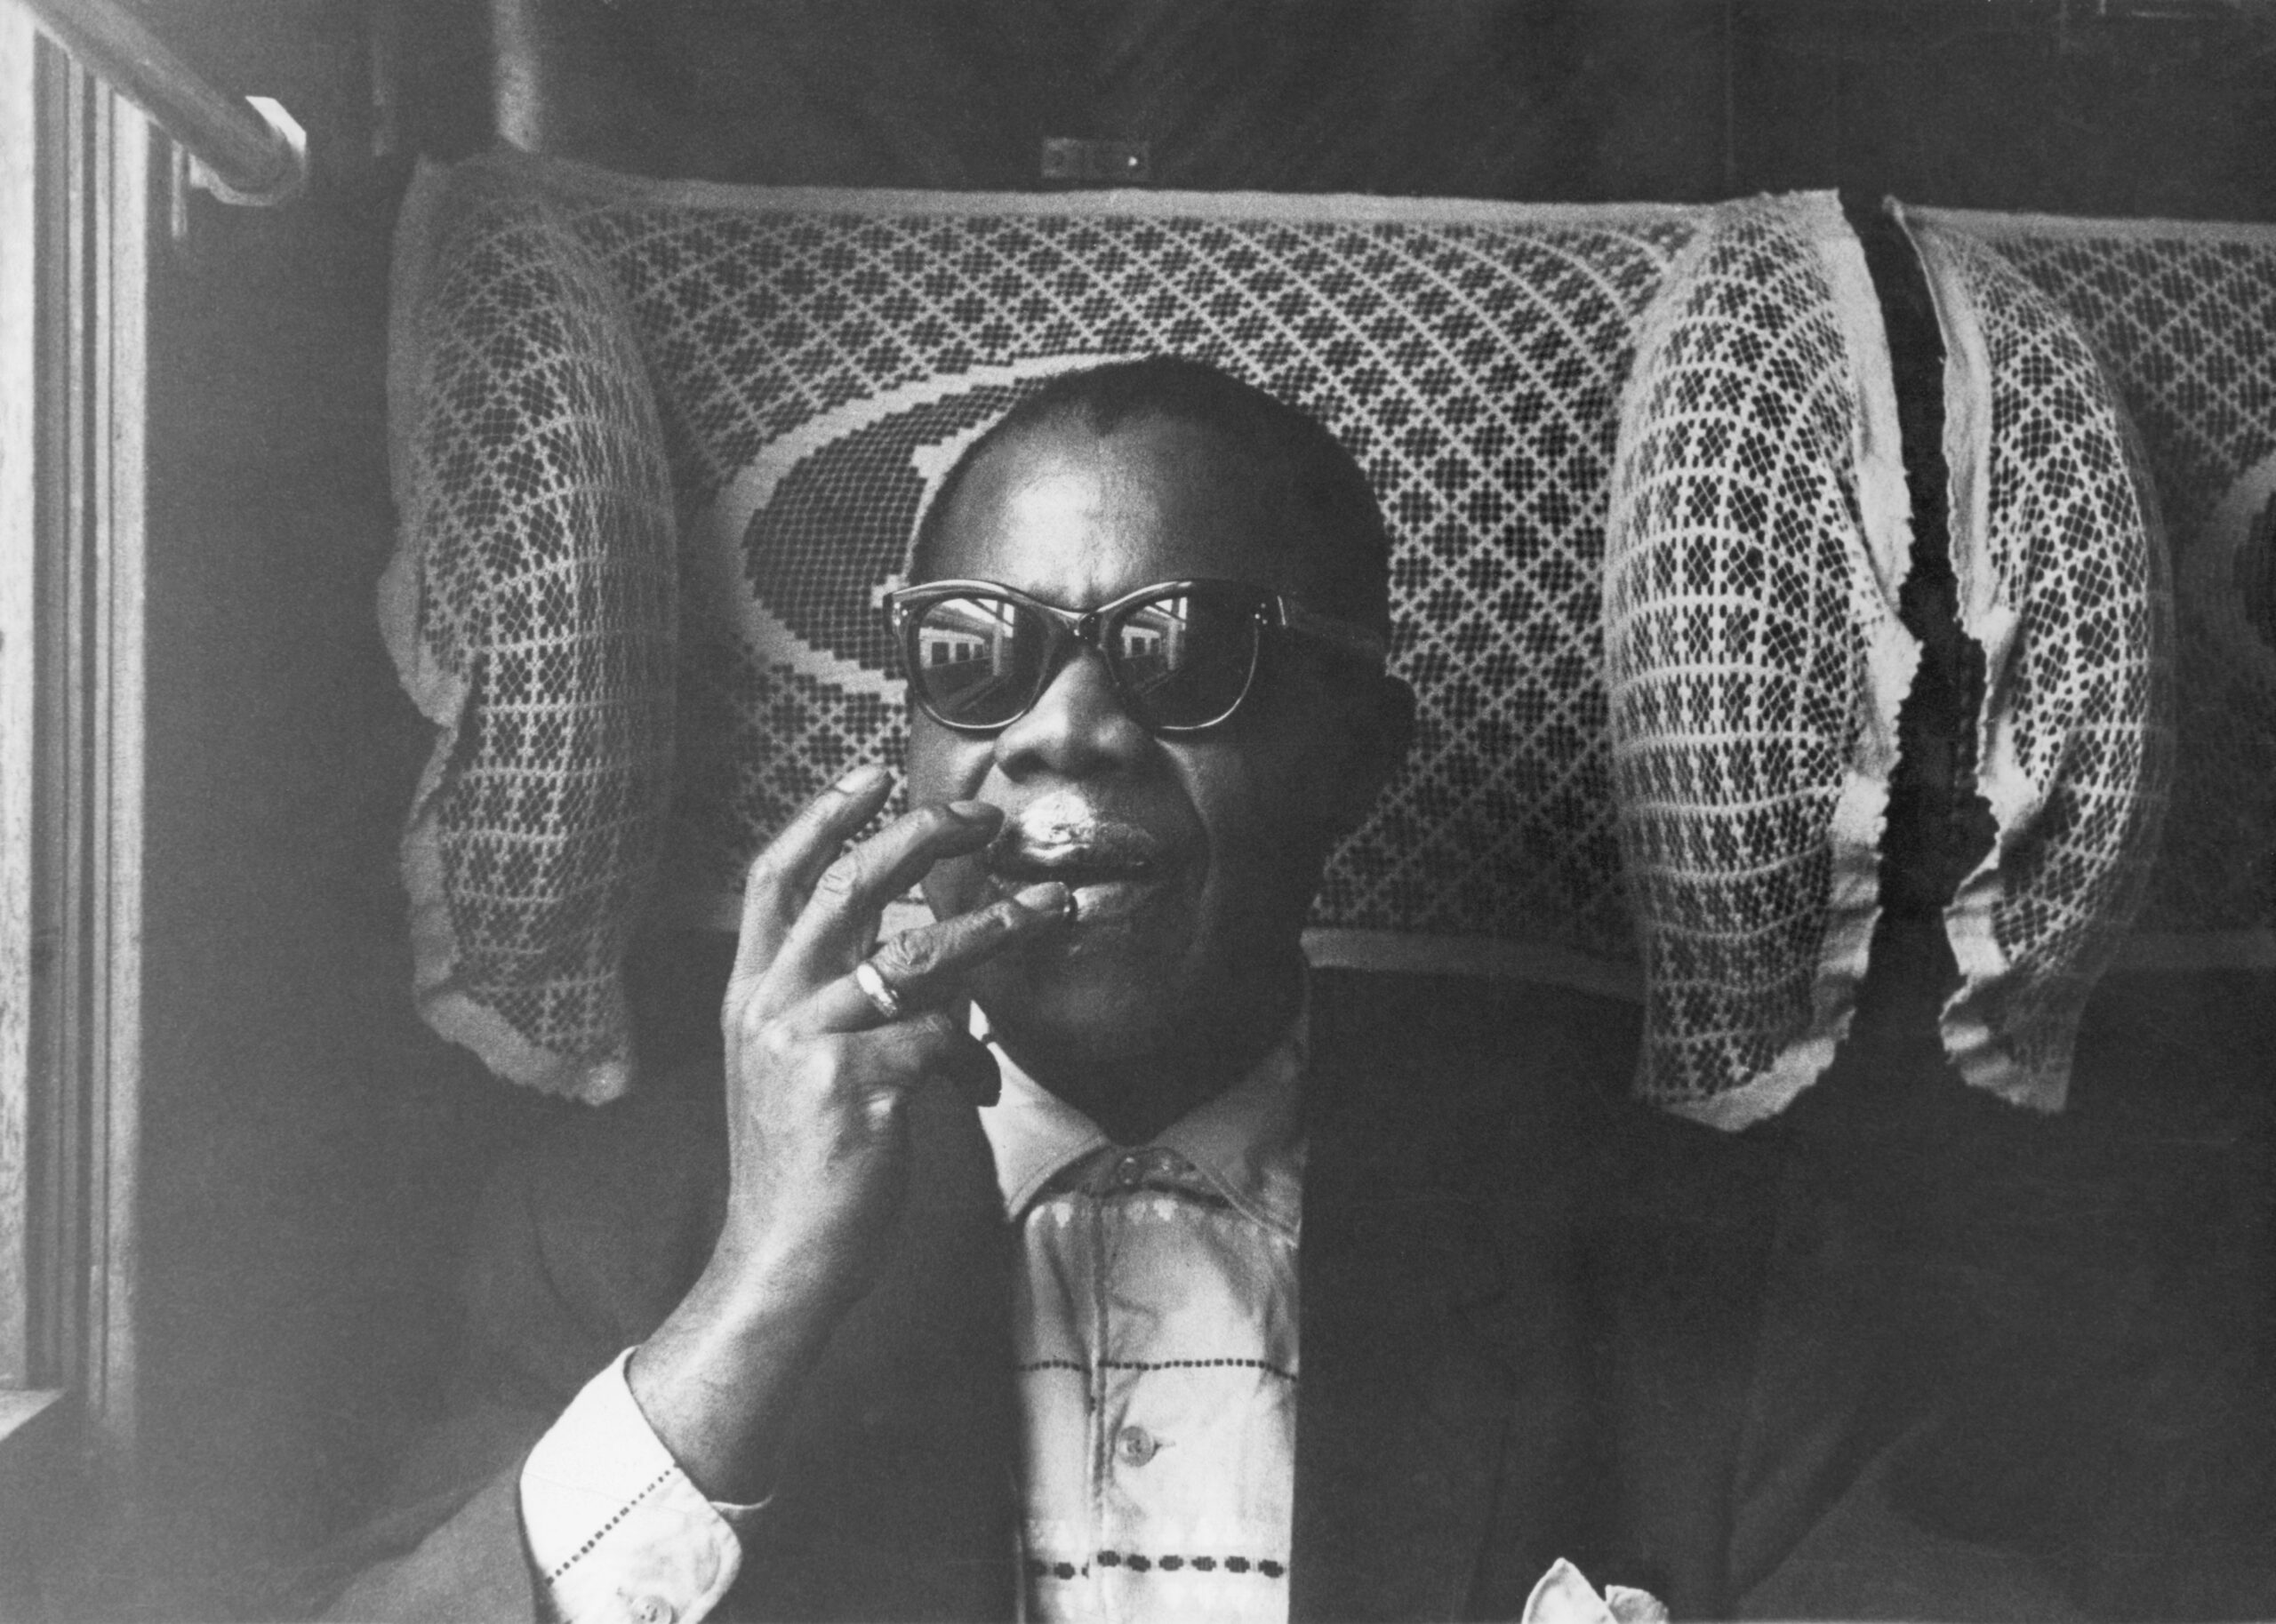 Louis Armstrong wearing sunglasses on train, moisturizing his lips